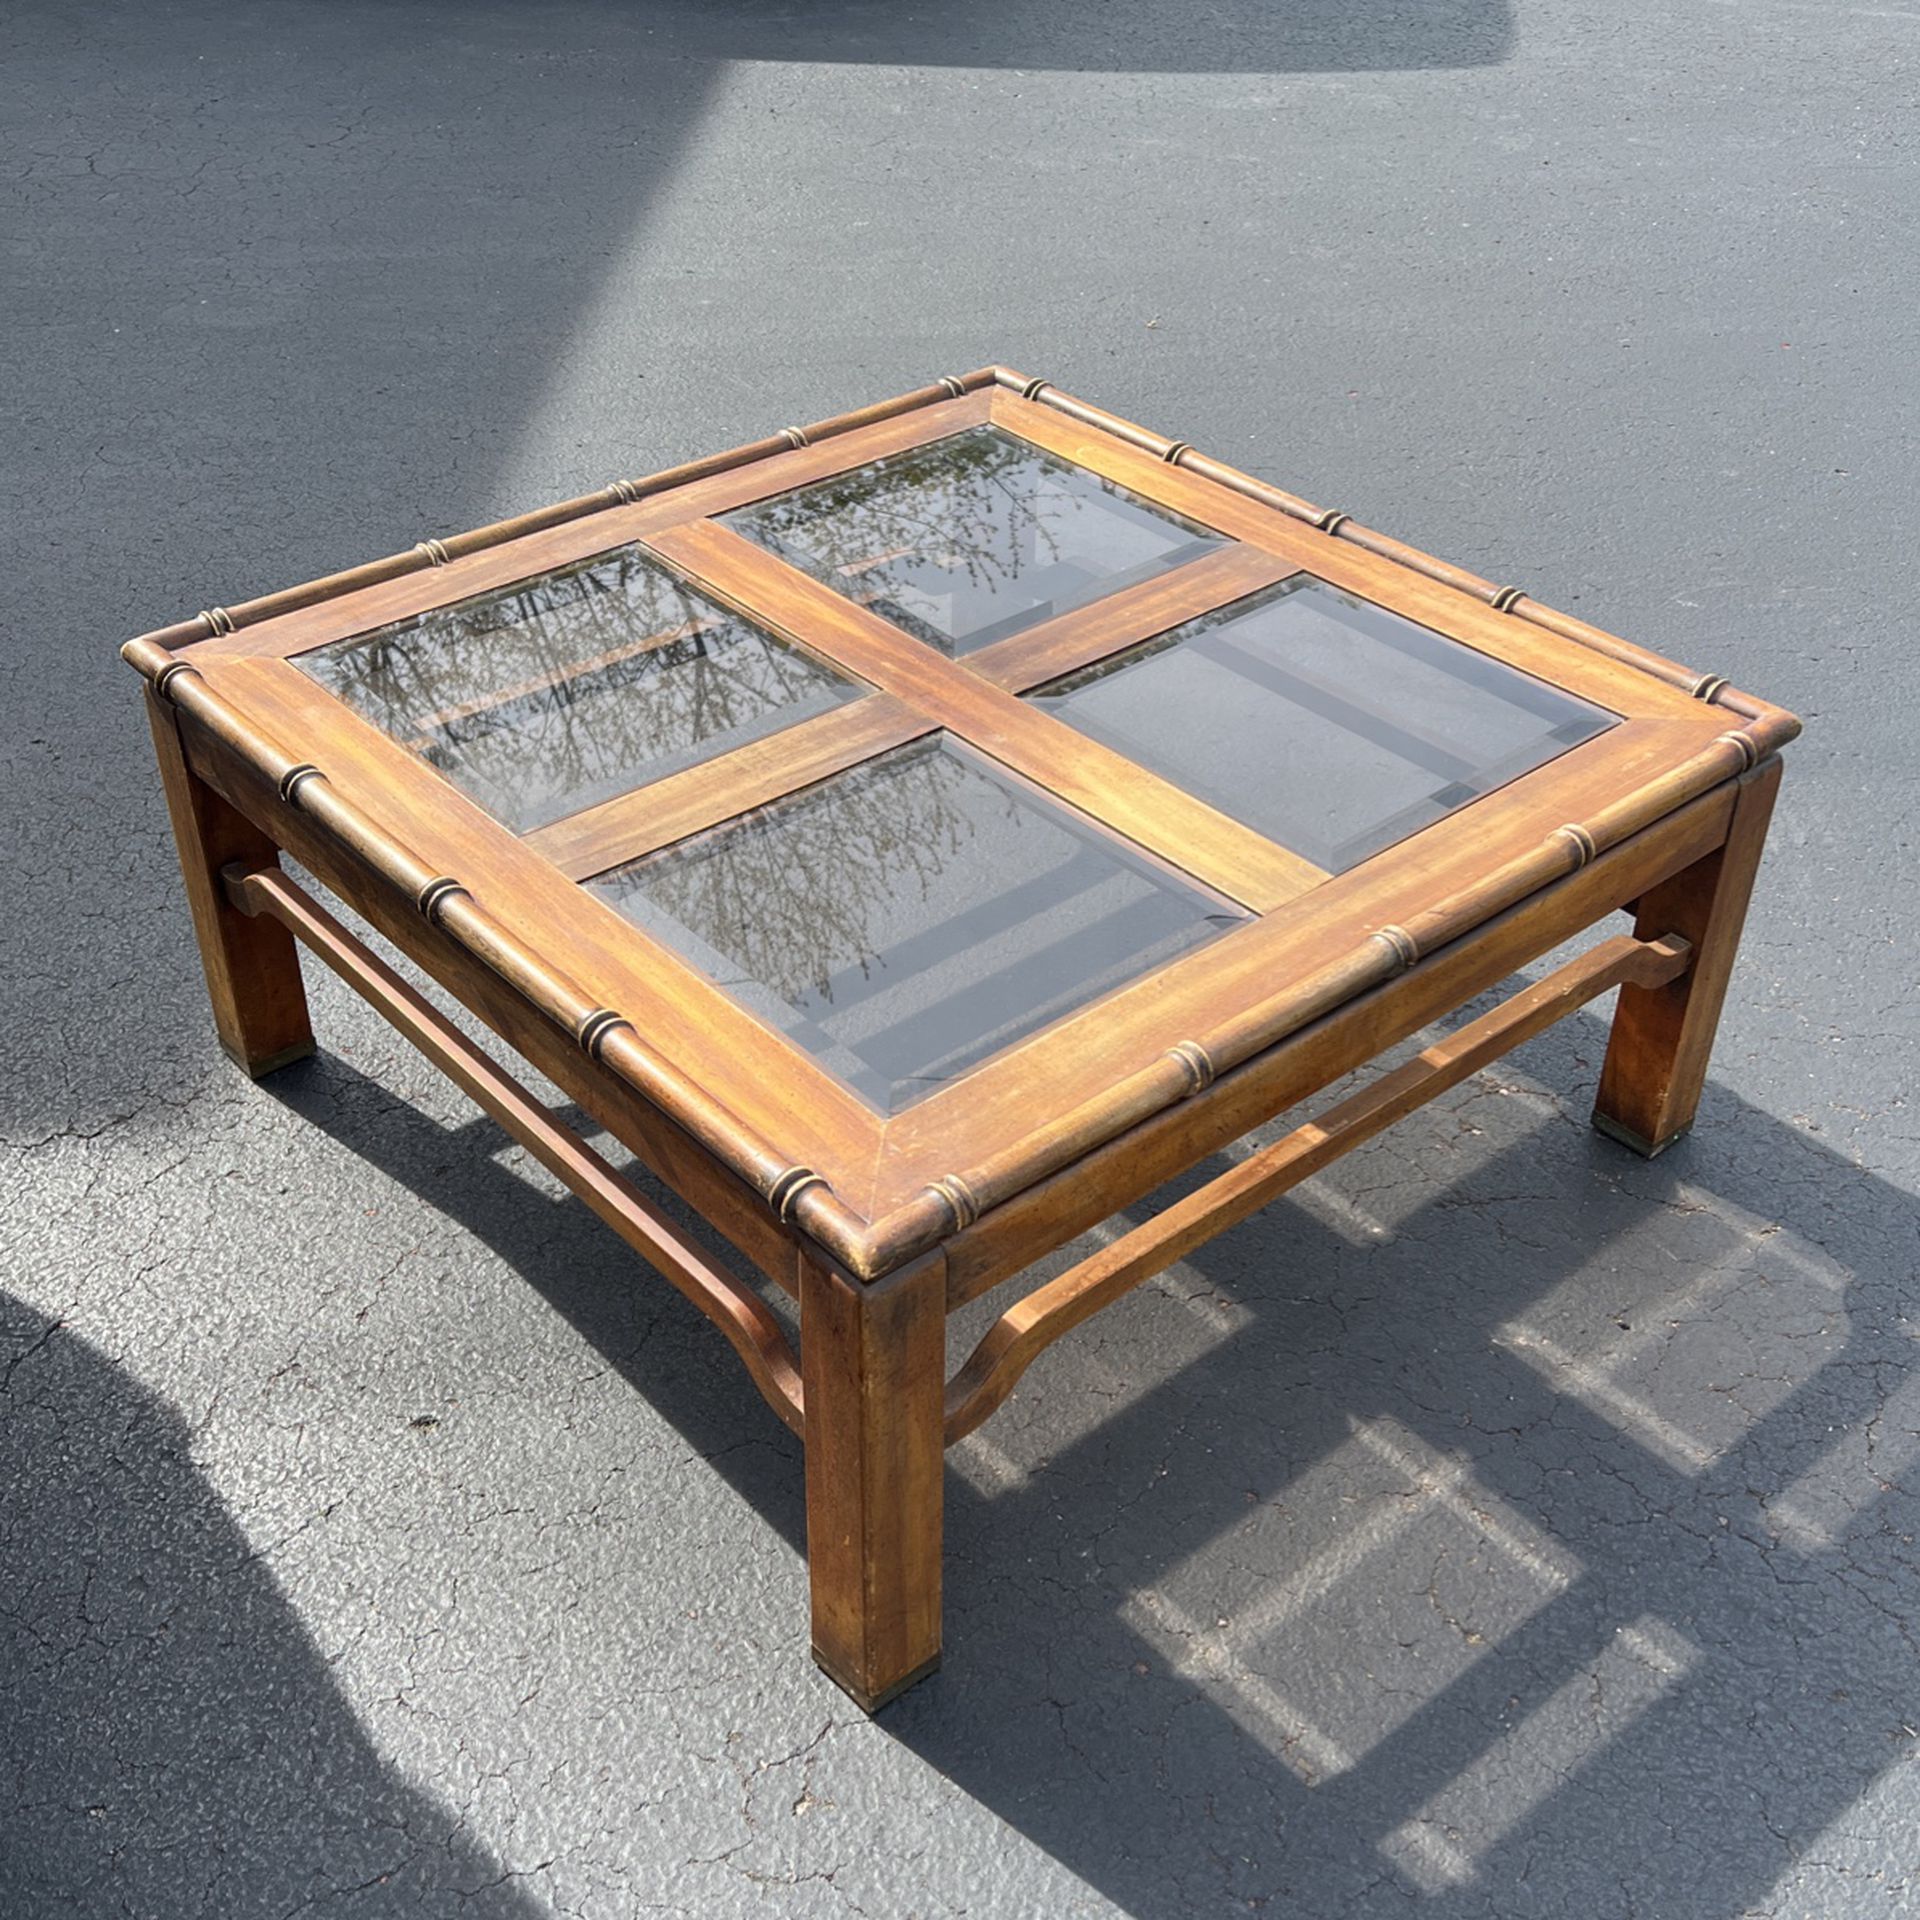 Elegant Wooden Coffee Table w/ Glass Panes